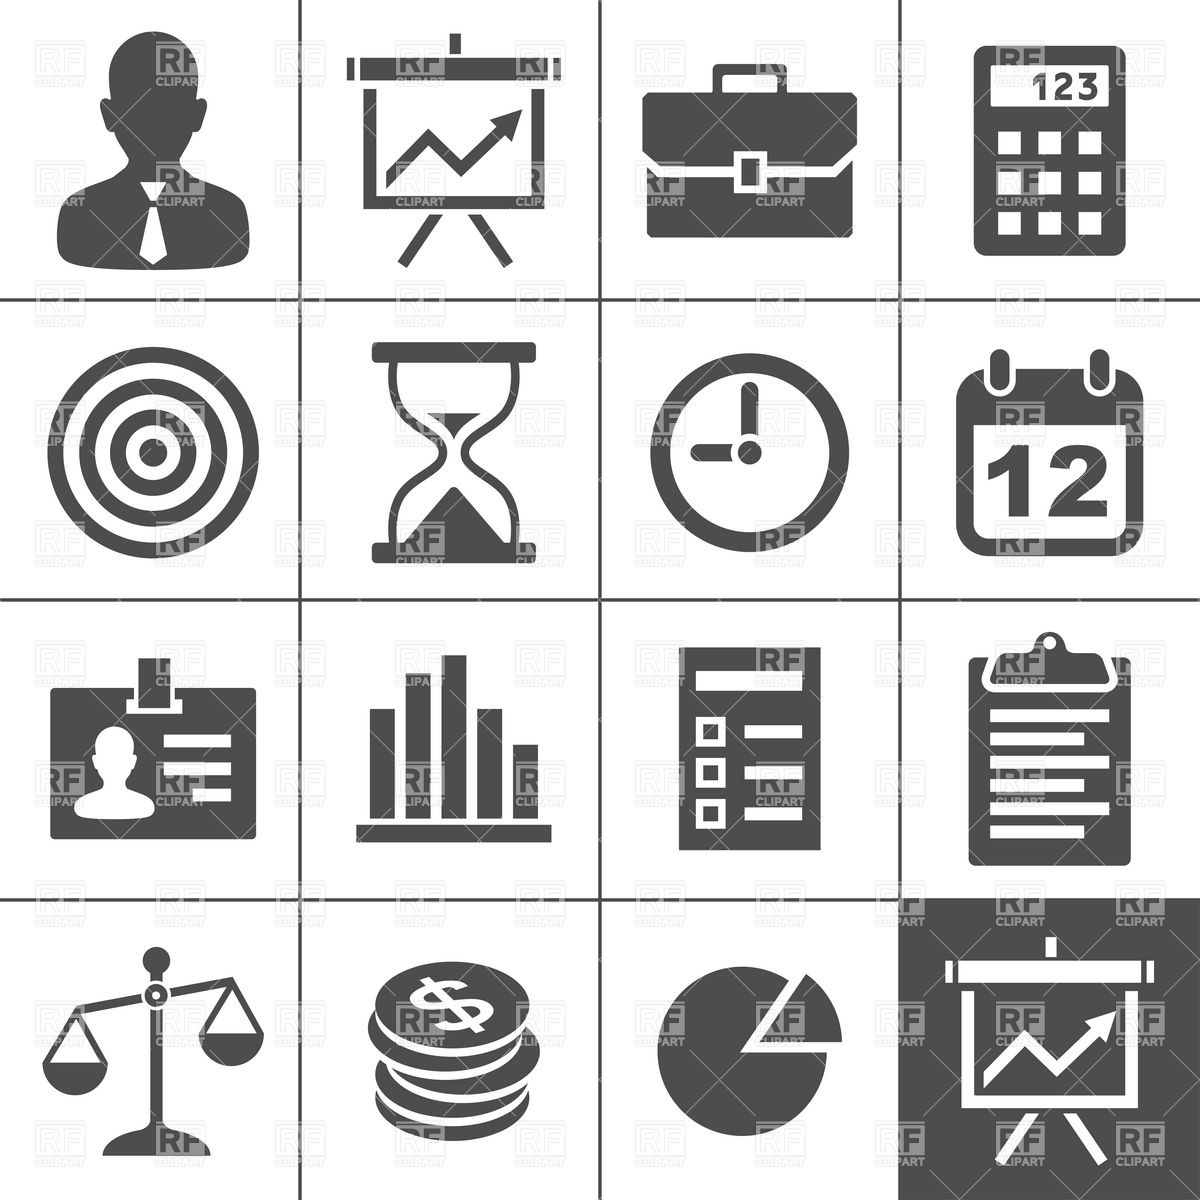 Business Icons Vector Free